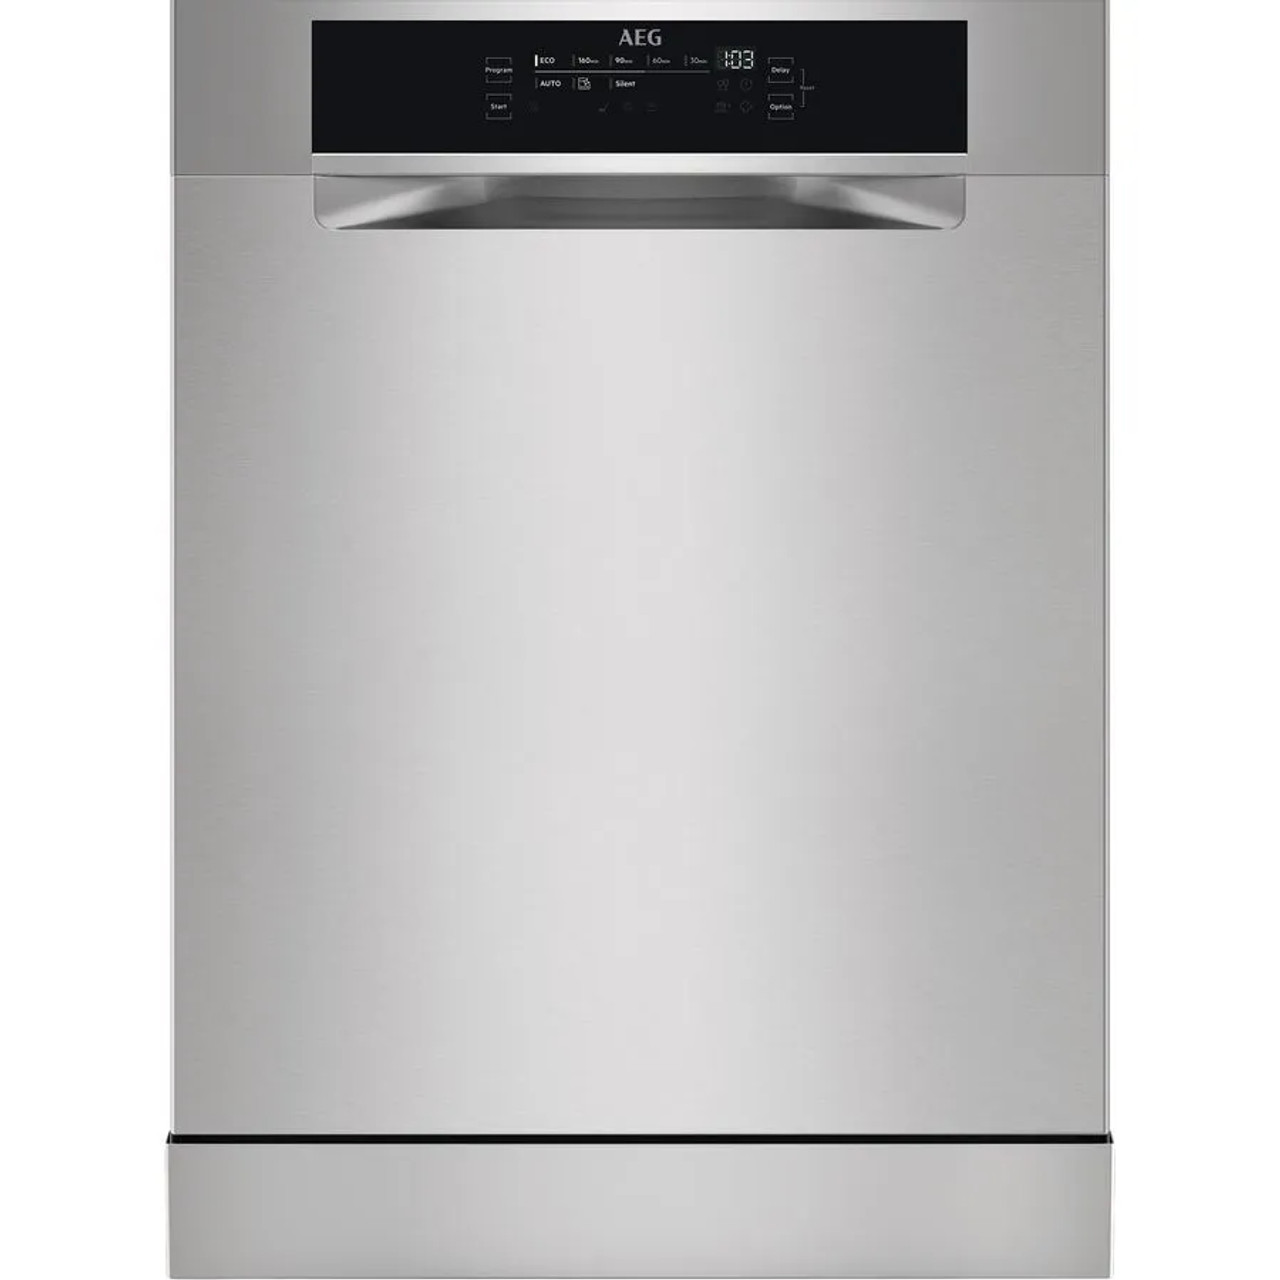 FFE93800PM - 60cm ProClean Built Under Dishwasher with ComfortLift Basket -  Stainless Steel